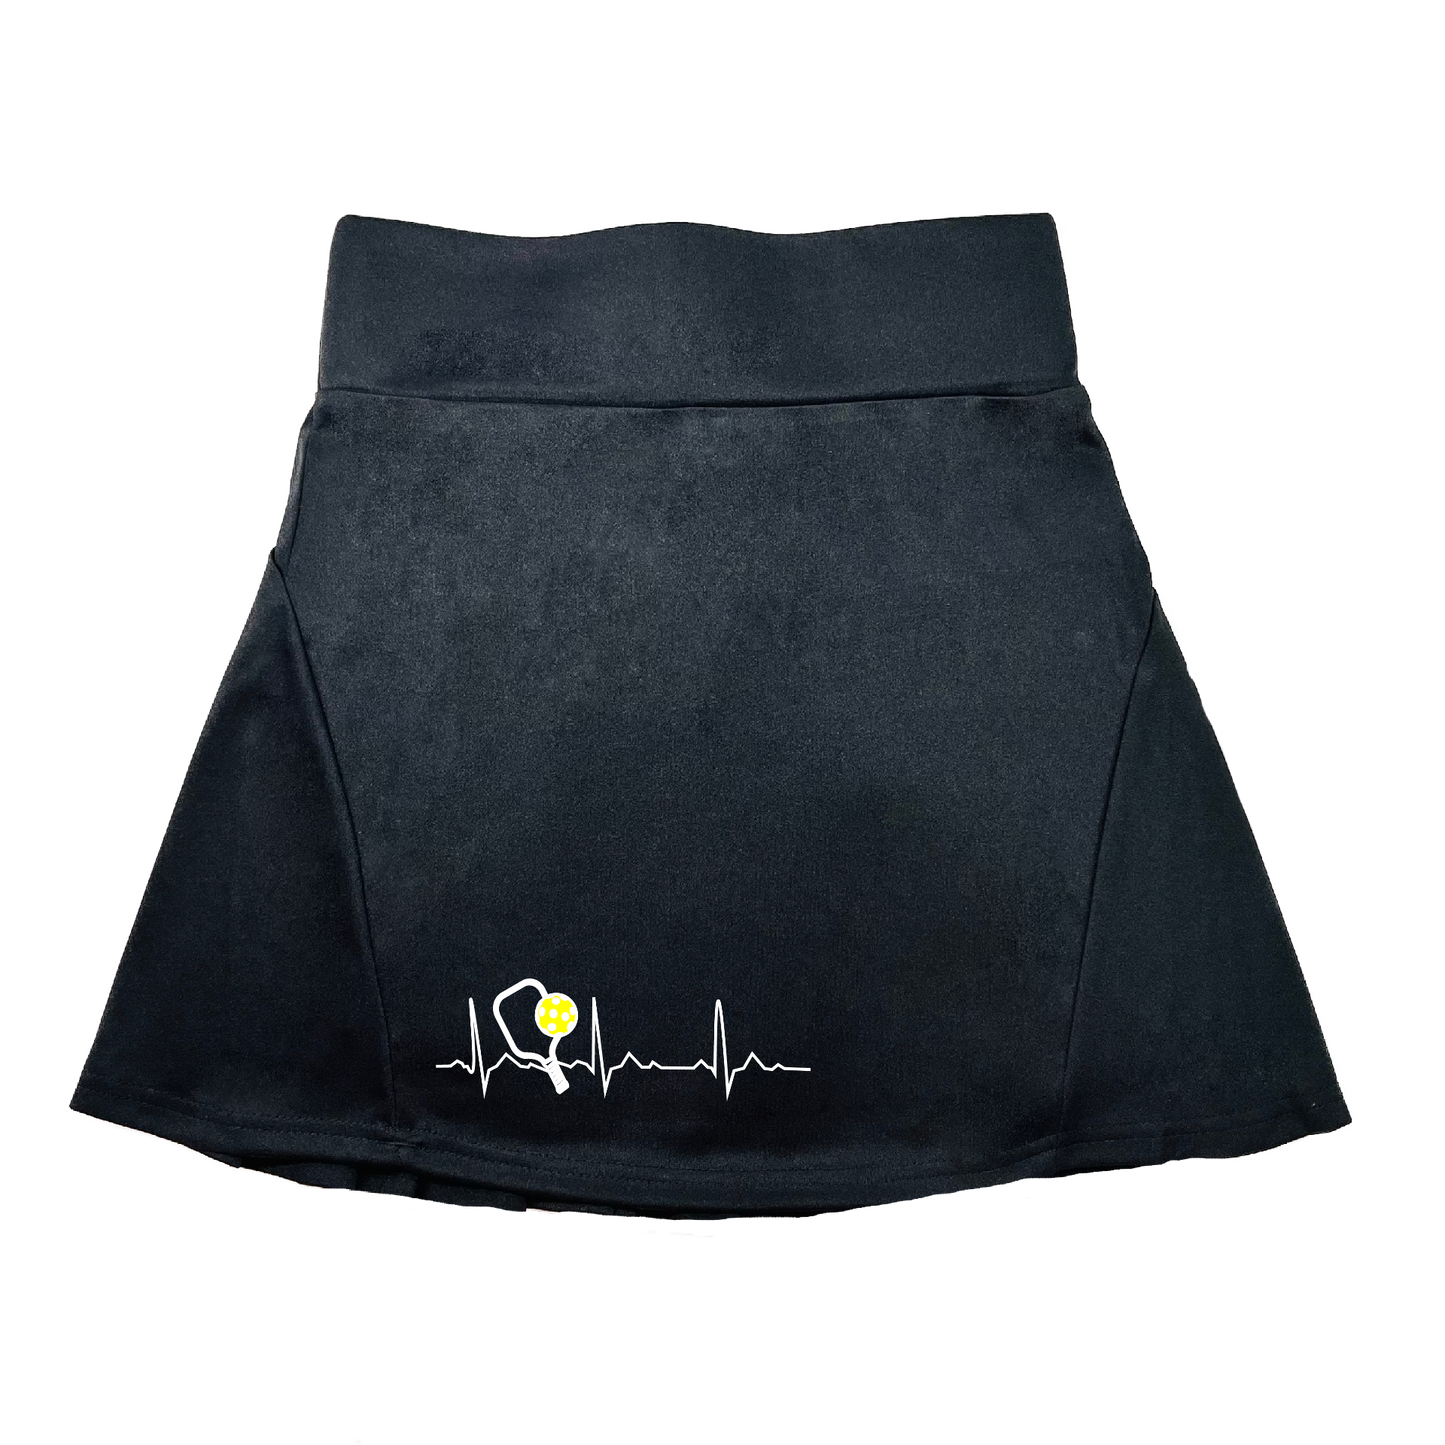 Pickleball Flirty Skort Design:  Pickleball Heartbeat  These flirty skorts have a flat mid-rise waistband with a 3 inch waistband.  Light weight without being see through and the material wicks away moisture quickly.  Flirty pleats in the back with inner shorts for free movement and stylish coverage on the courts.  A functional zipper pocket on the back and two built in pockets on the shorts for convenient storage. 